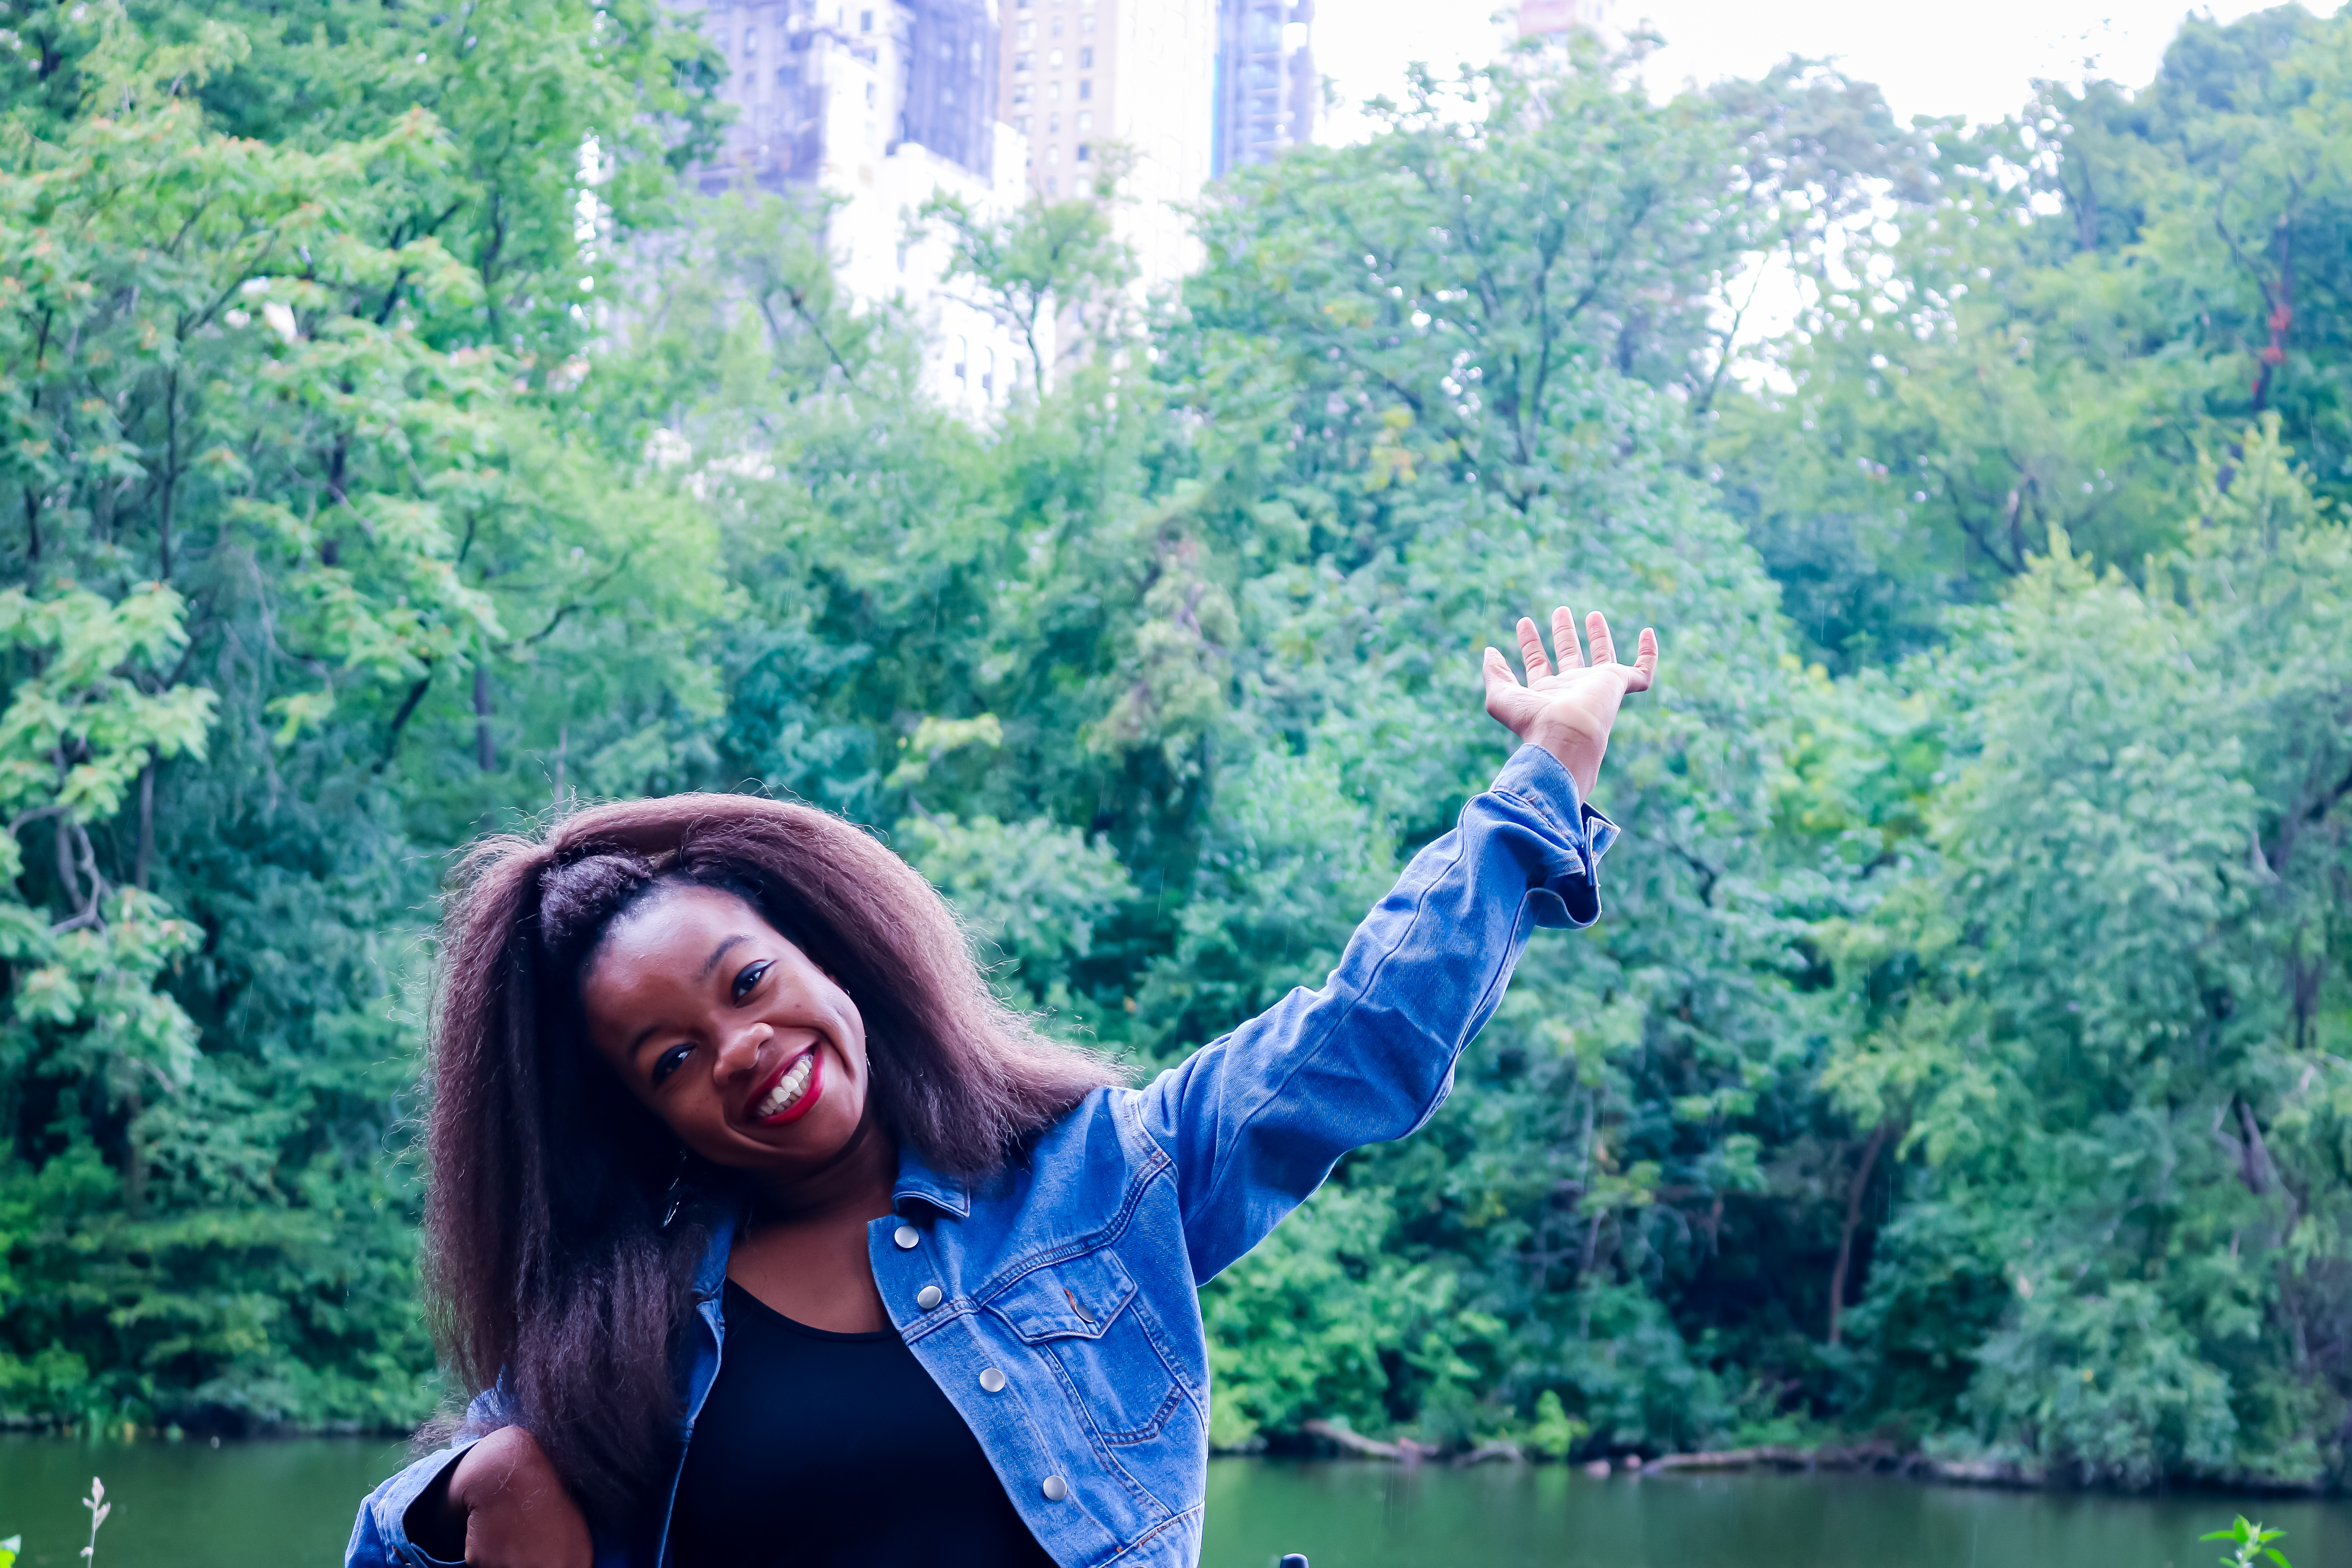 Rachy smiling in Central Park